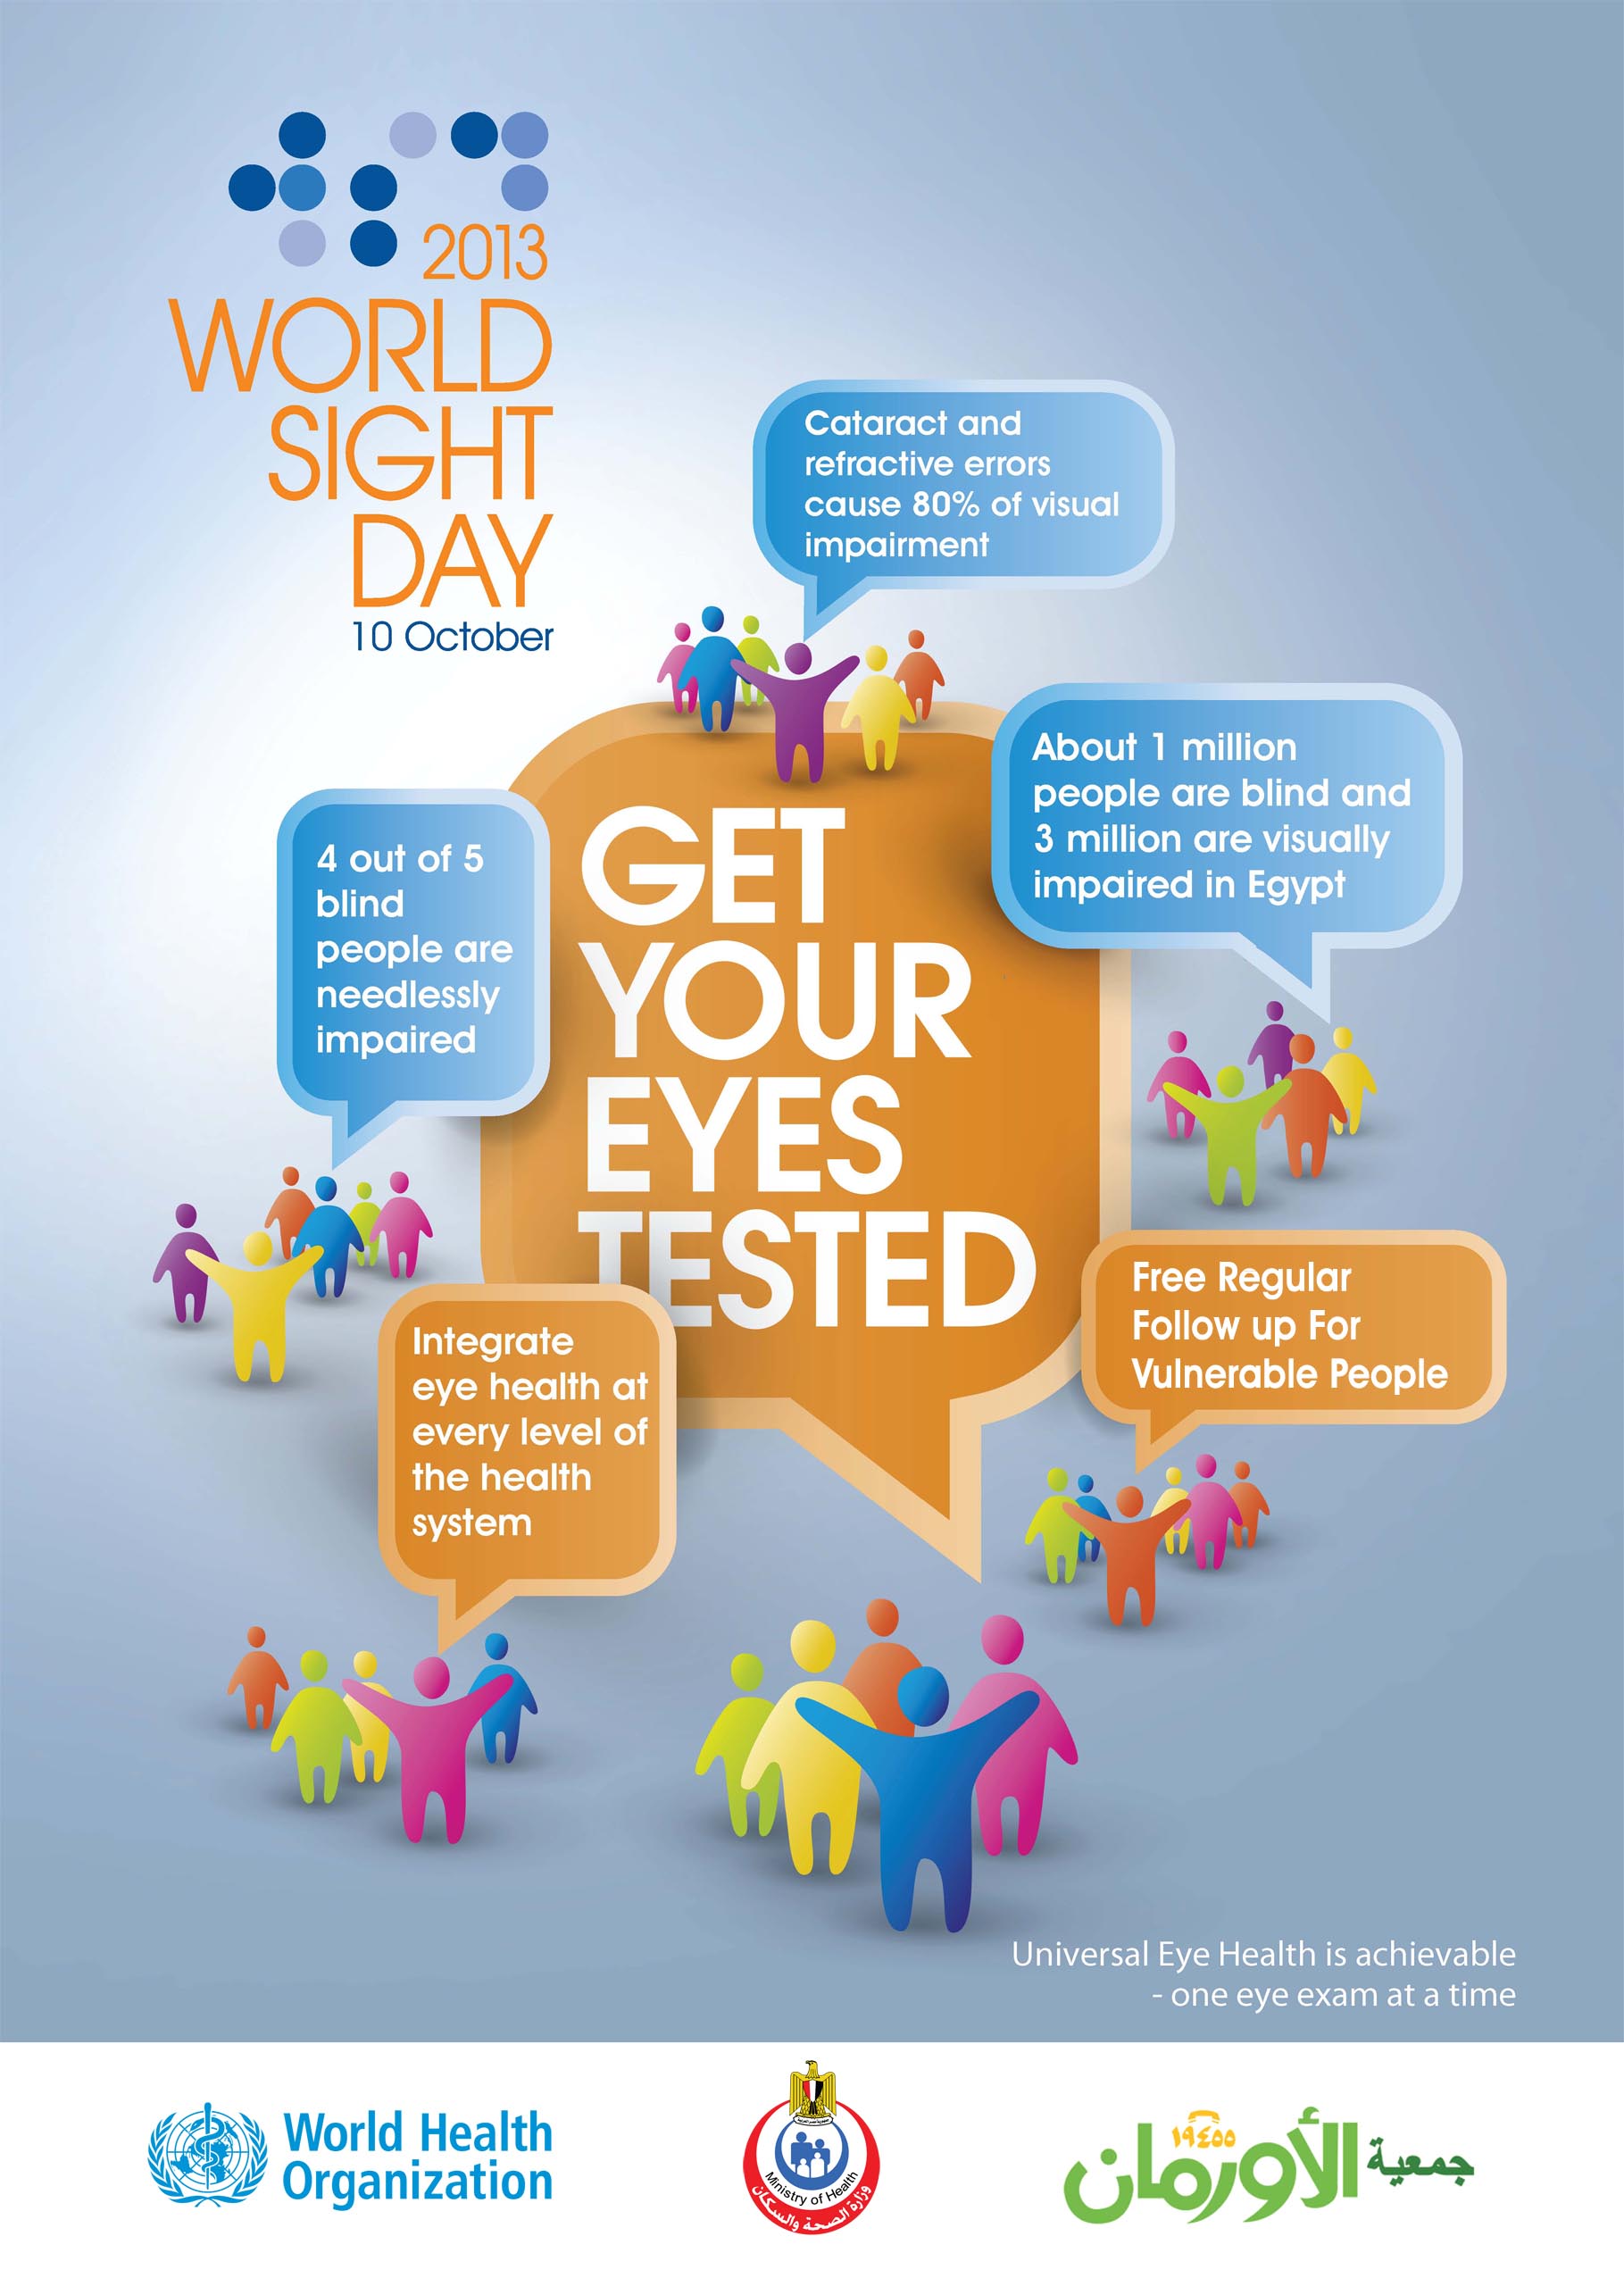 World Sight Day 2013 poster